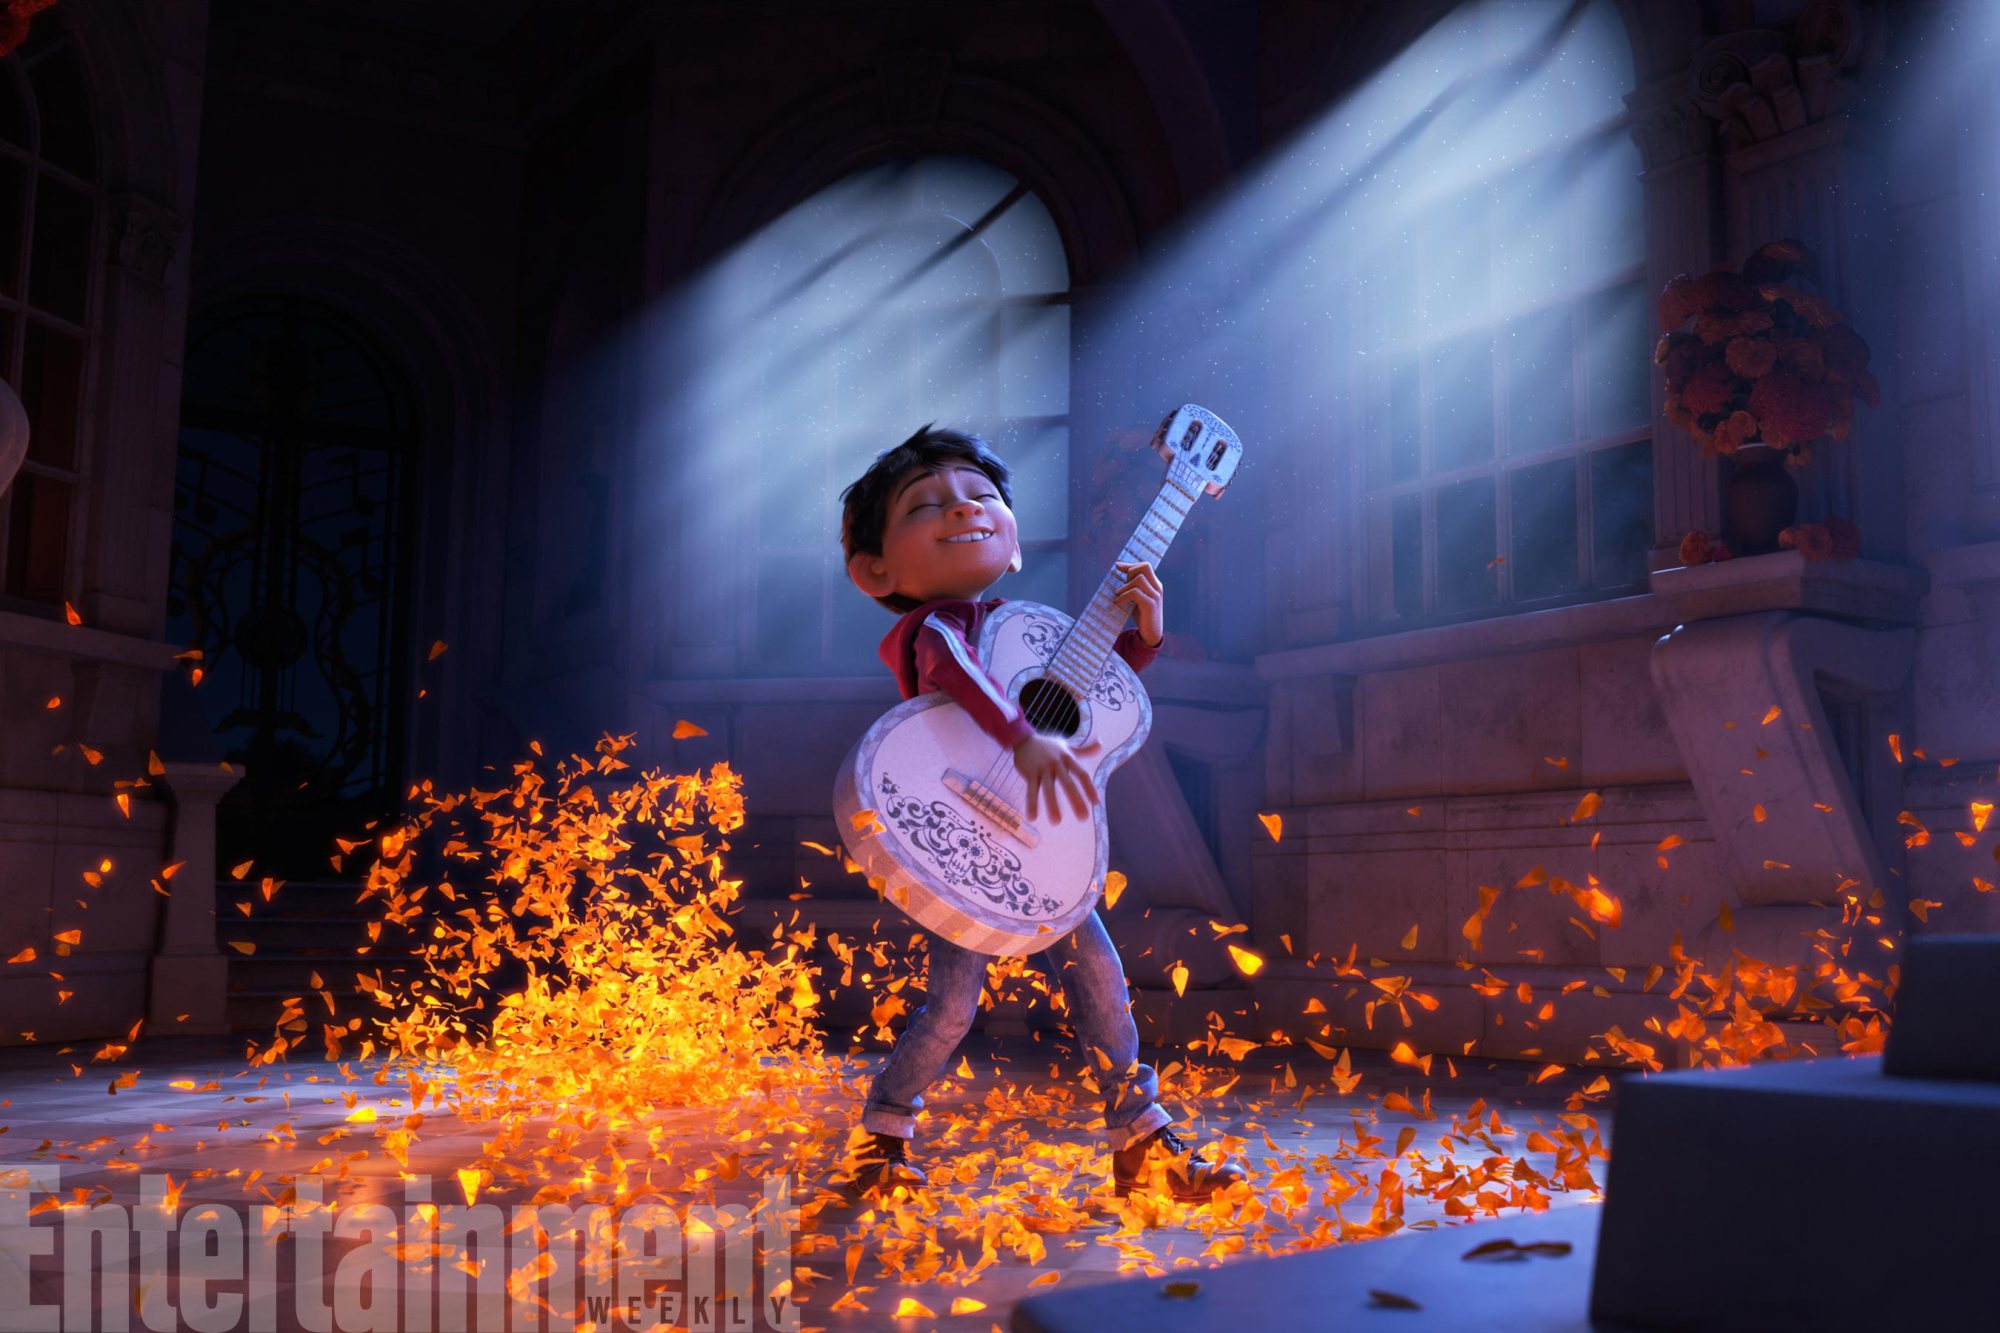 First Look at Pixar’s Coco Movie